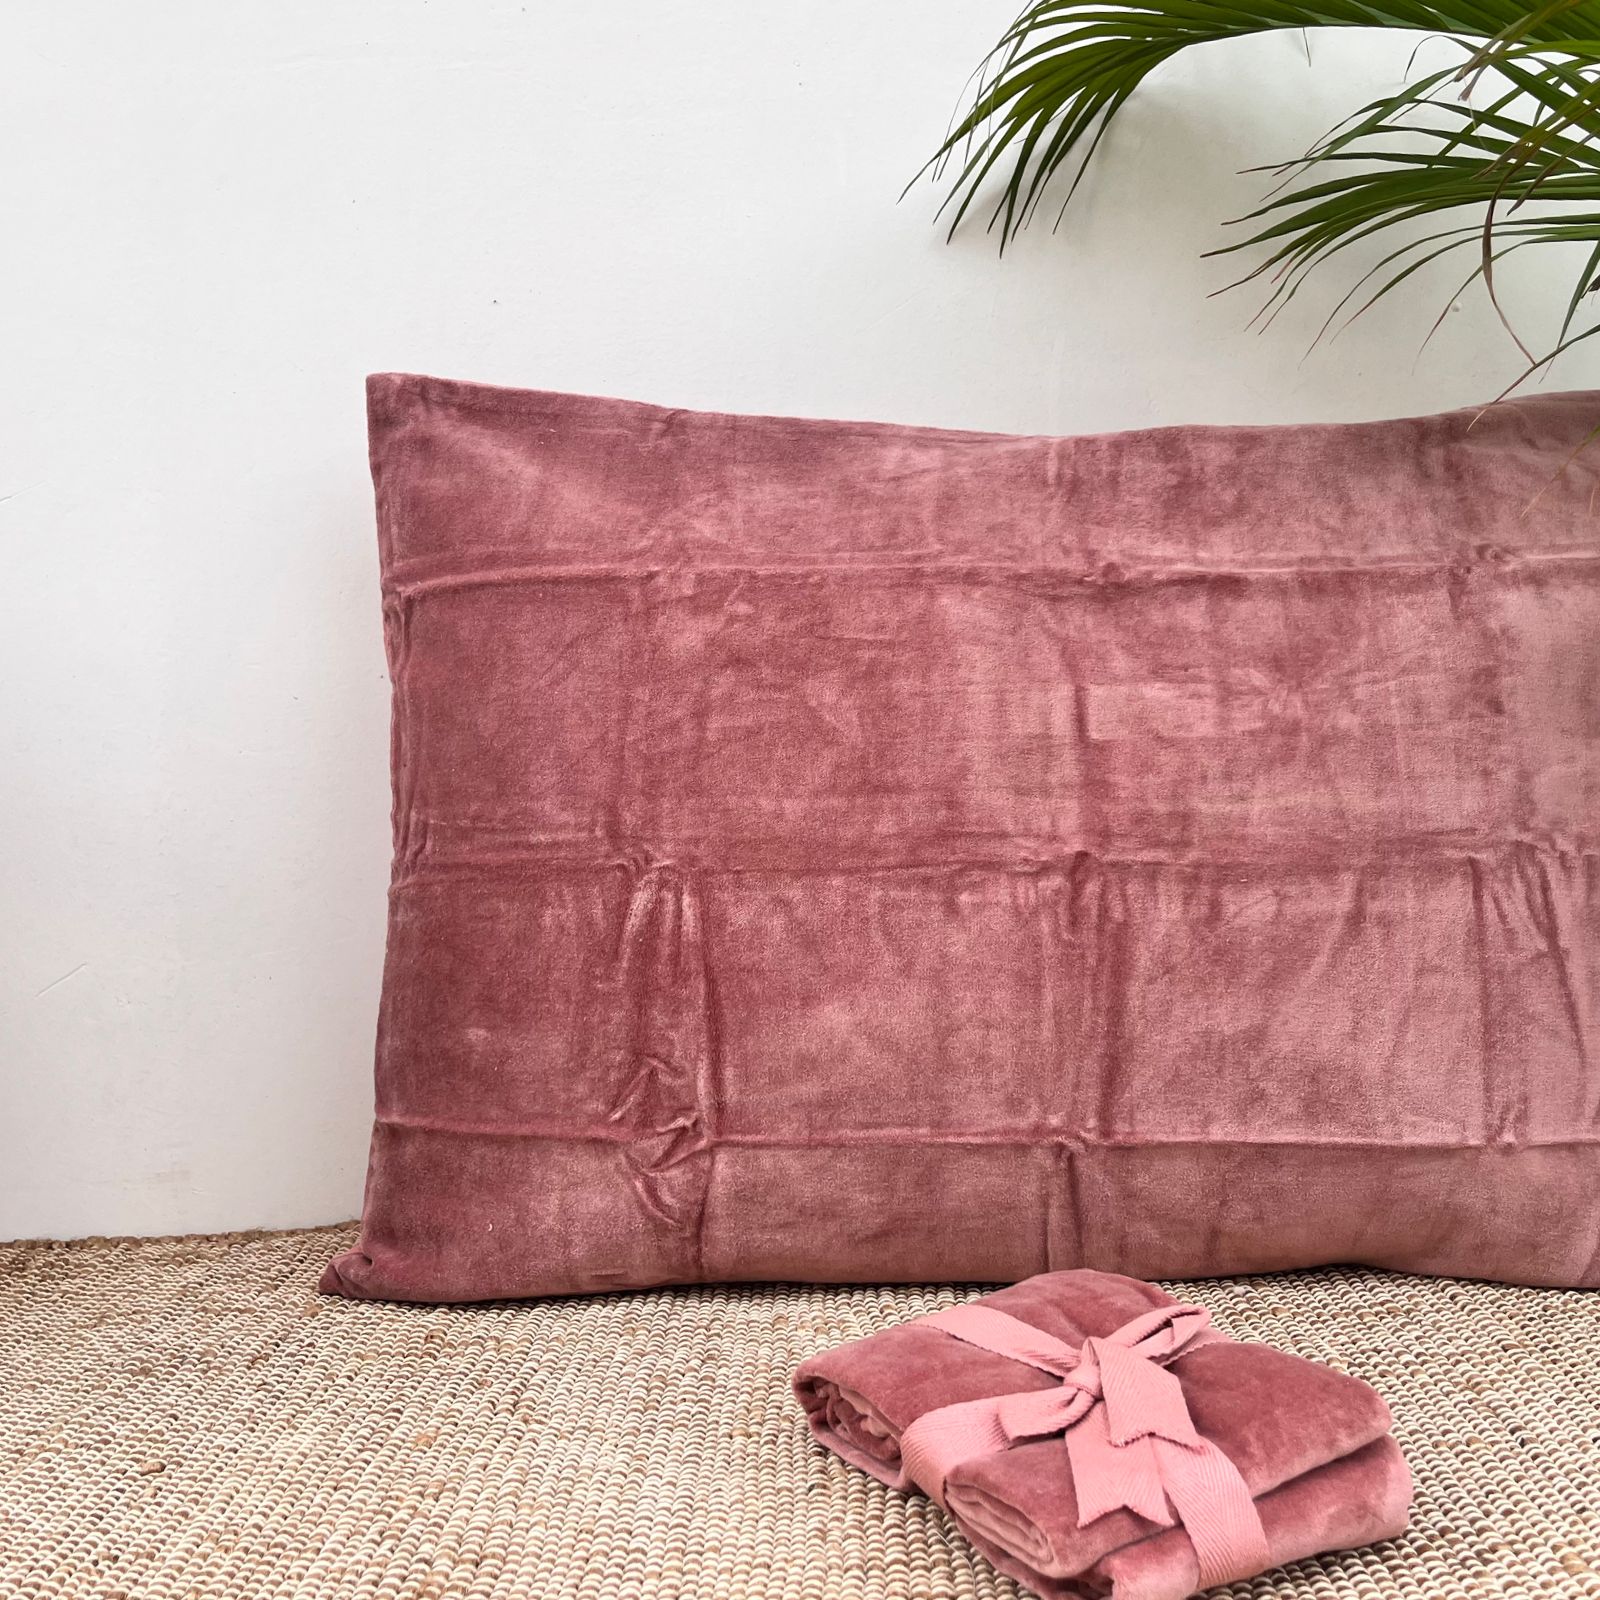 Velvet Pillow Cover with size of 50cm x 66cm (20" x 26")